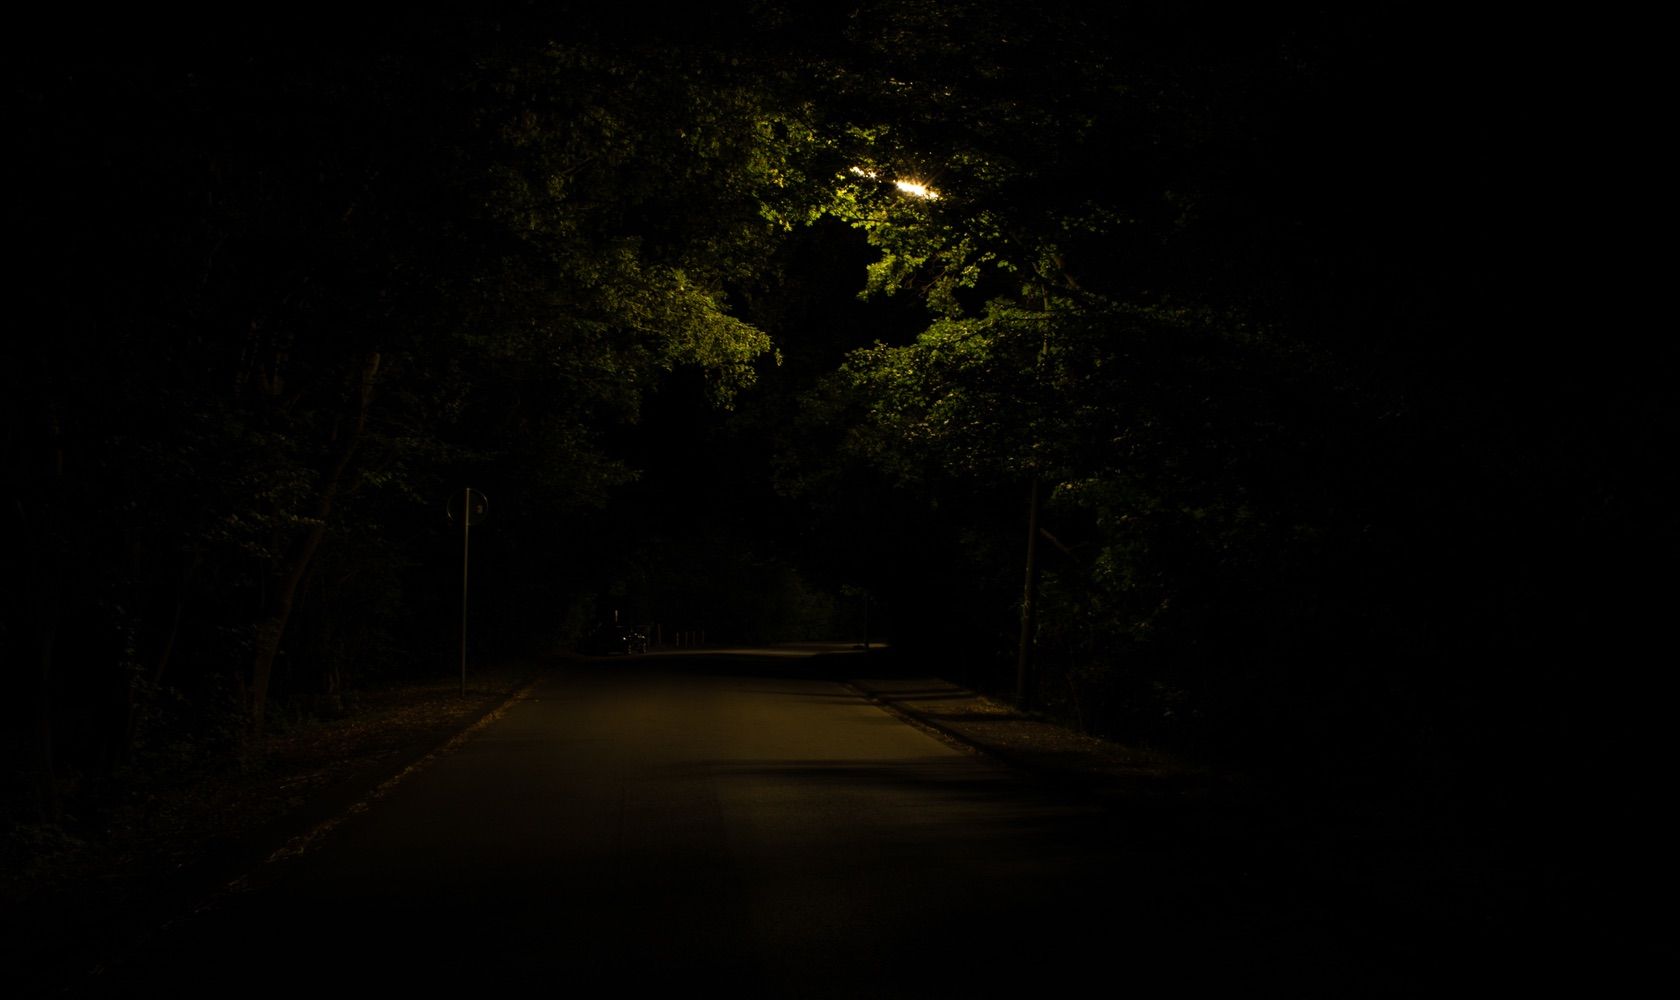 Dark road lined with trees at night